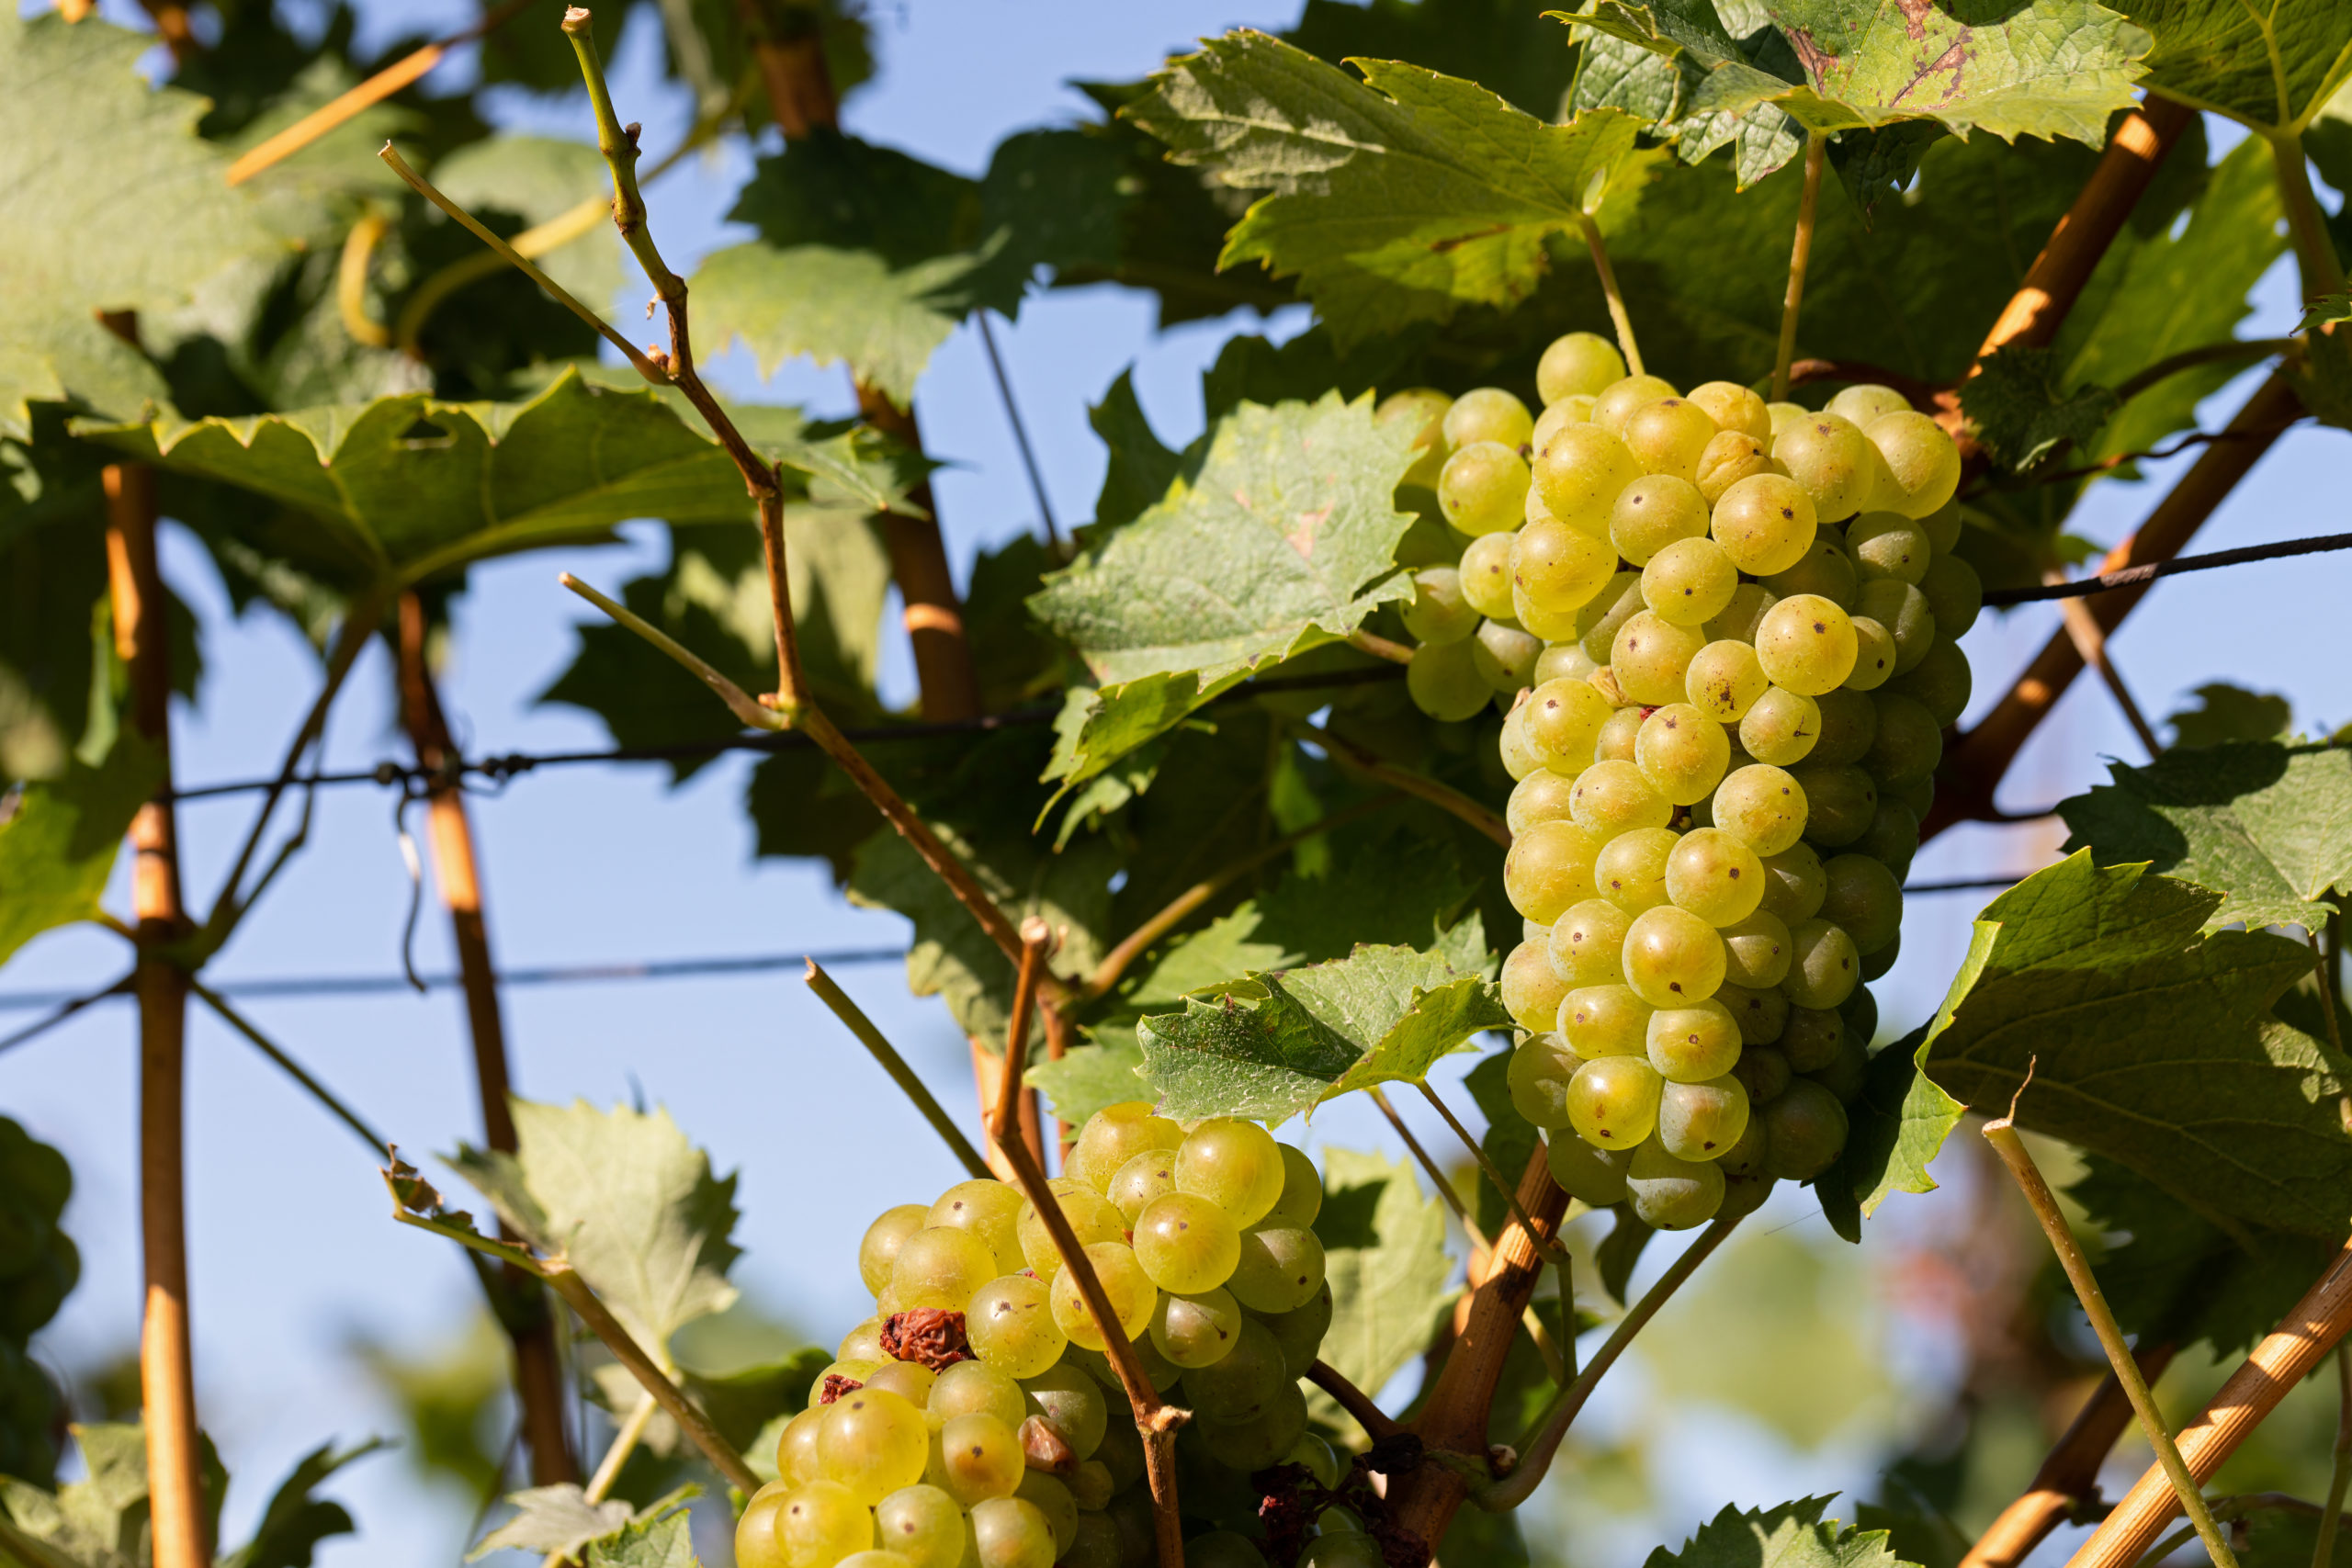 Vineyard in Romania showing a grape cluster ripening on the vine